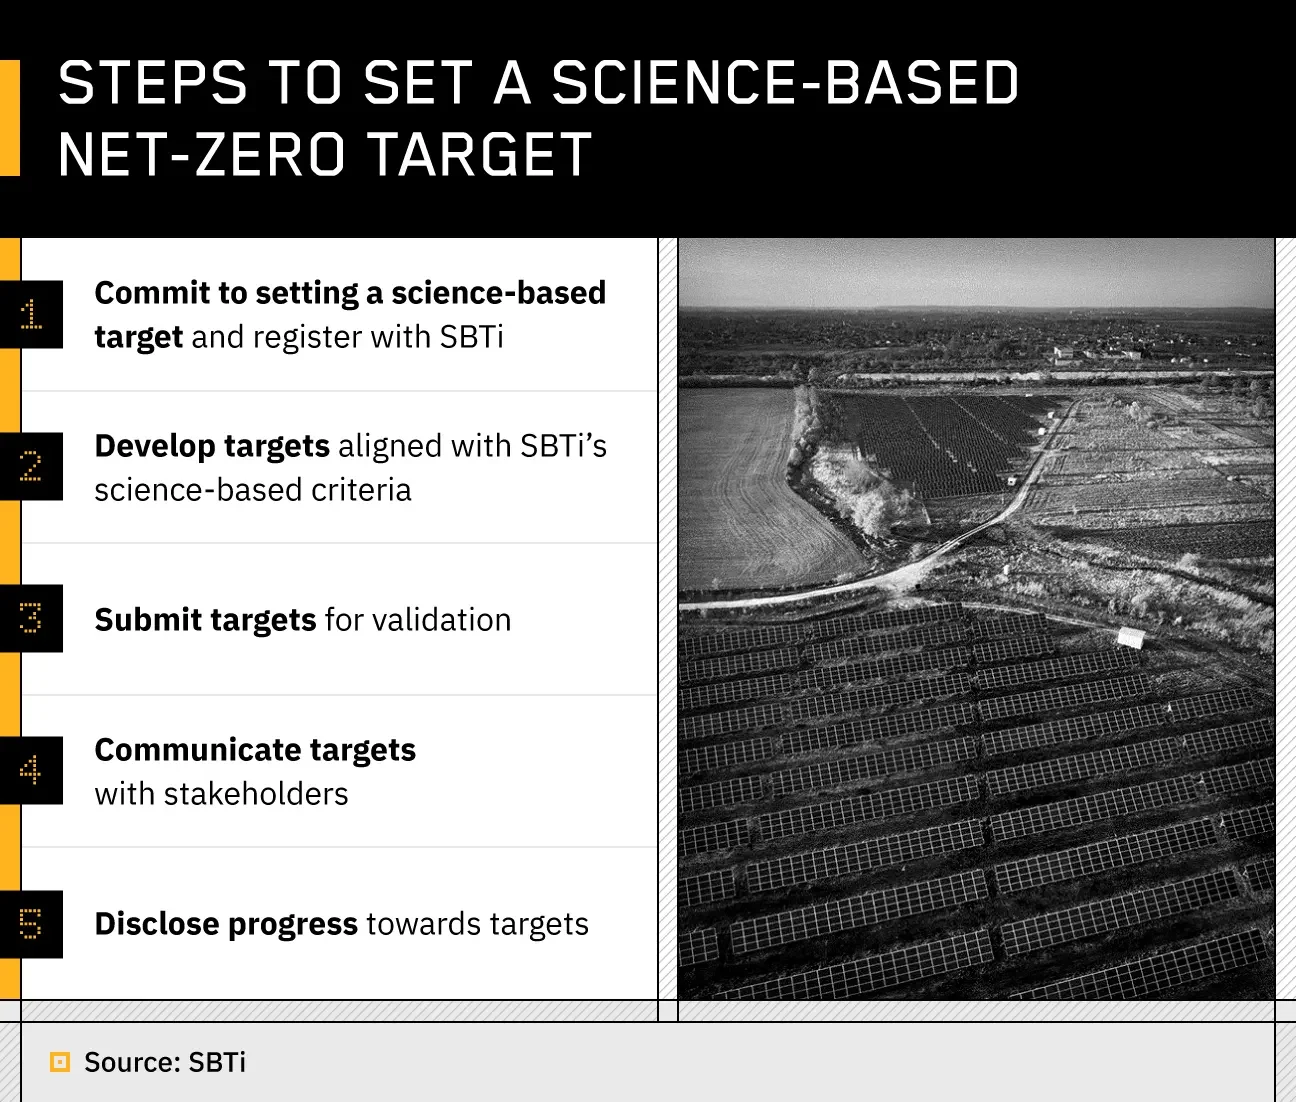 list of five steps to set a science-based net-zero target